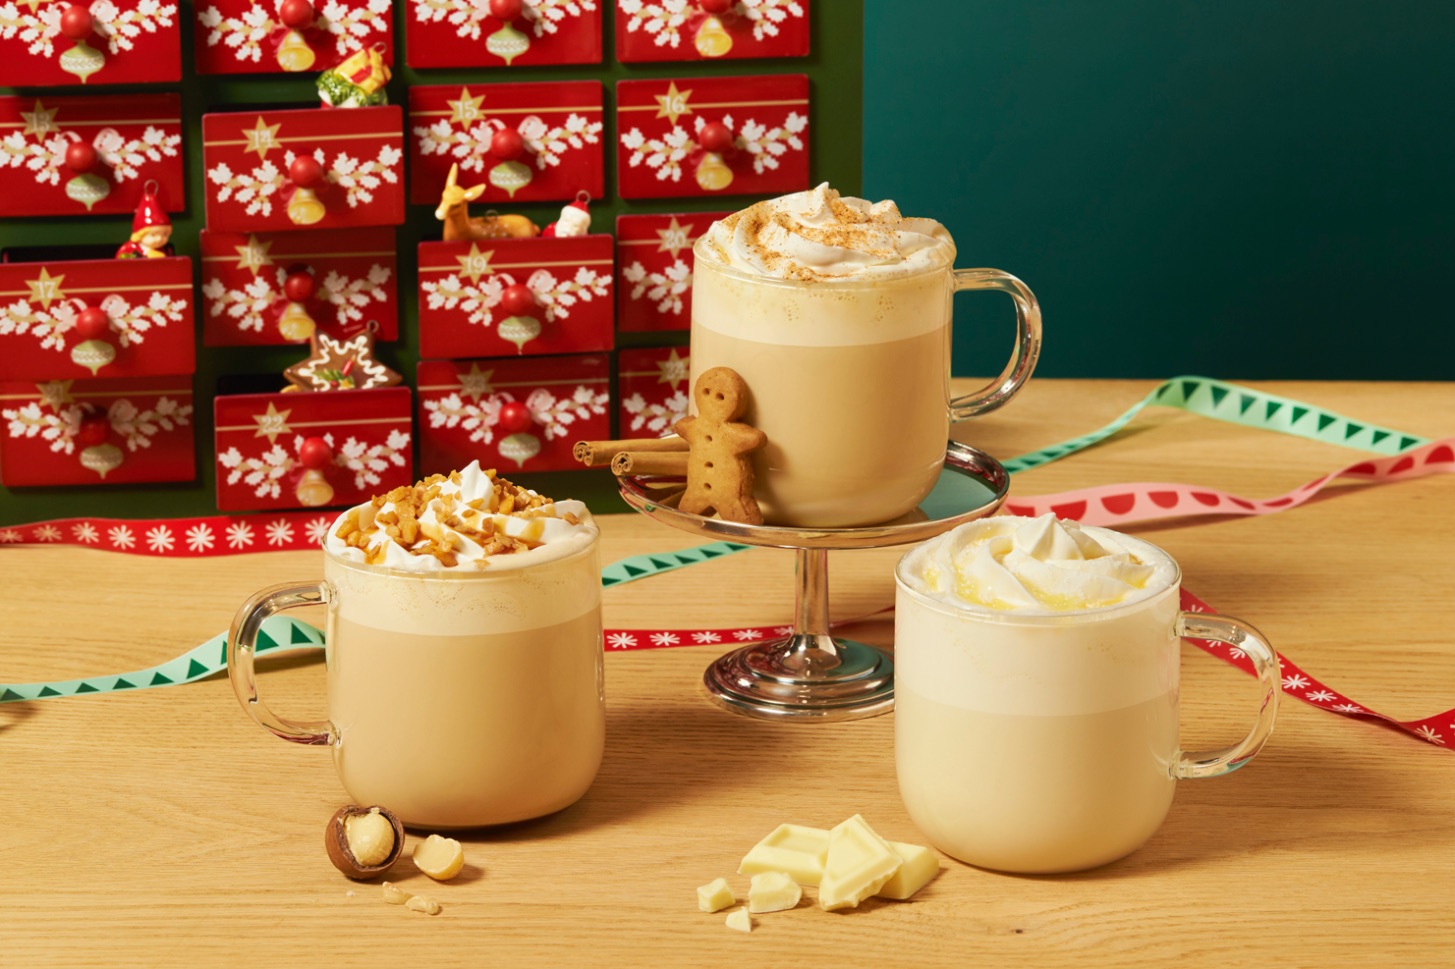 Keeping Customers Warm This Winter With The Return Of The Toffee Nut Latte, All & About